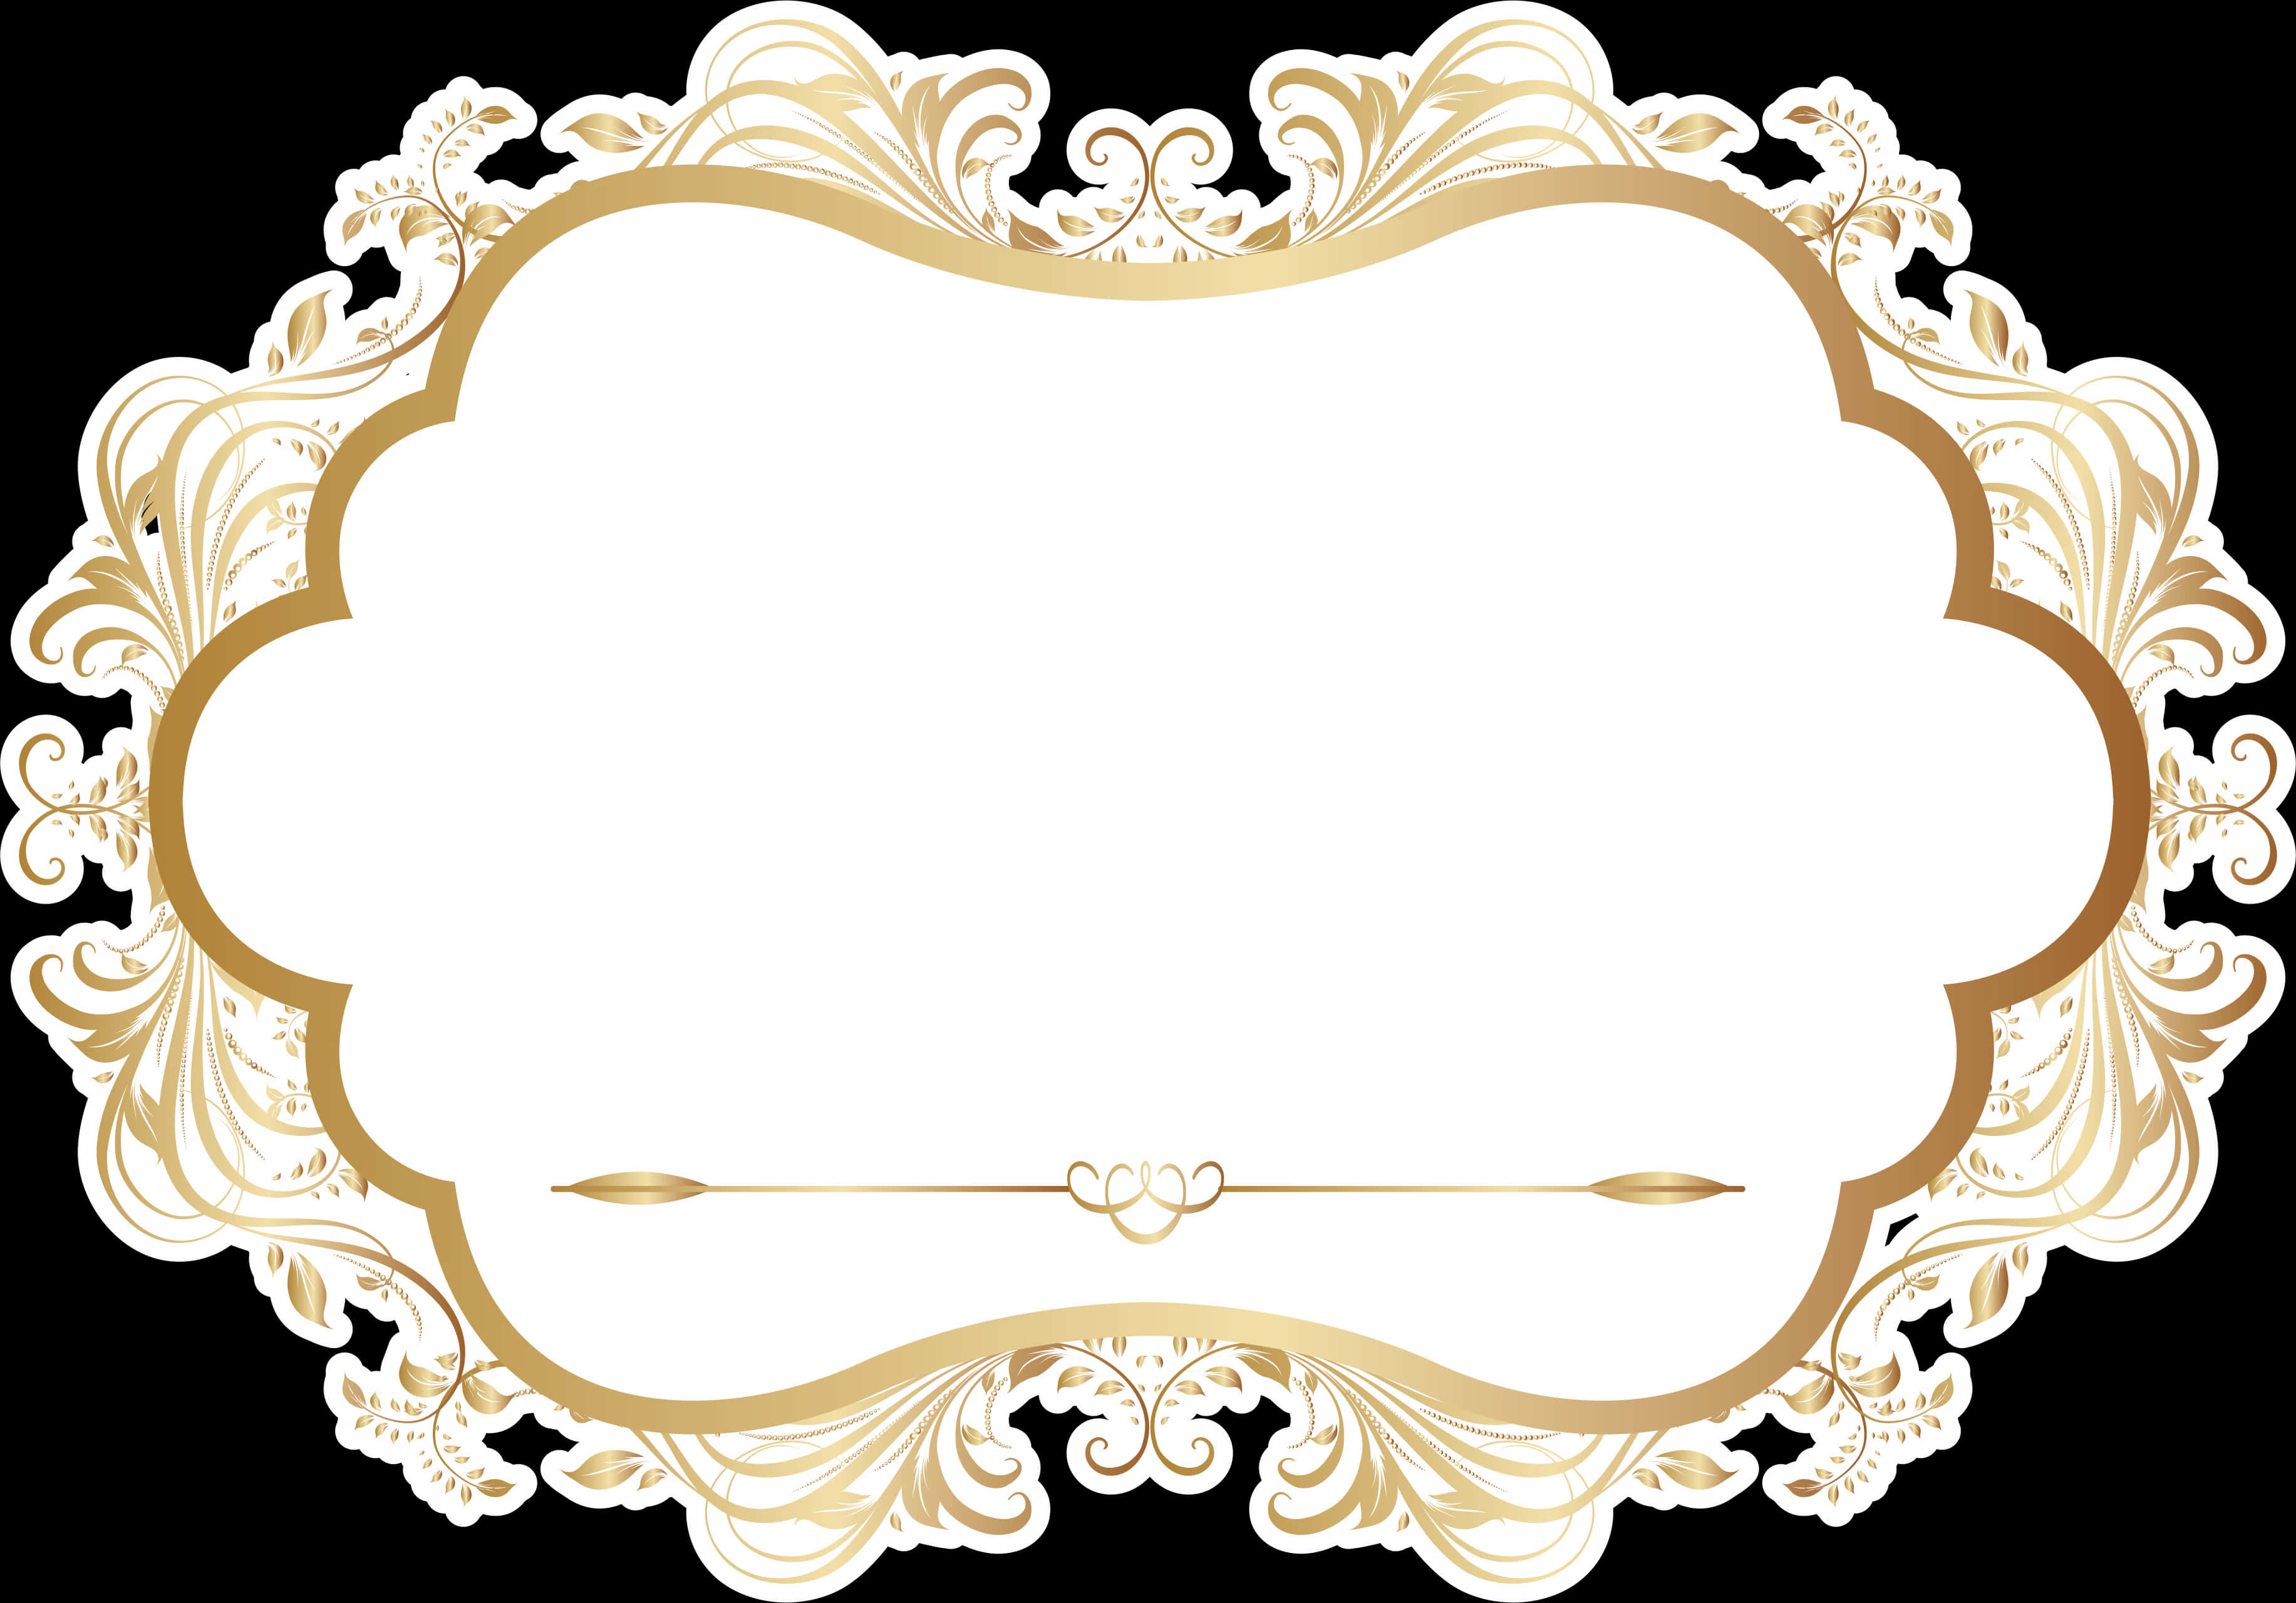 A White And Gold Frame